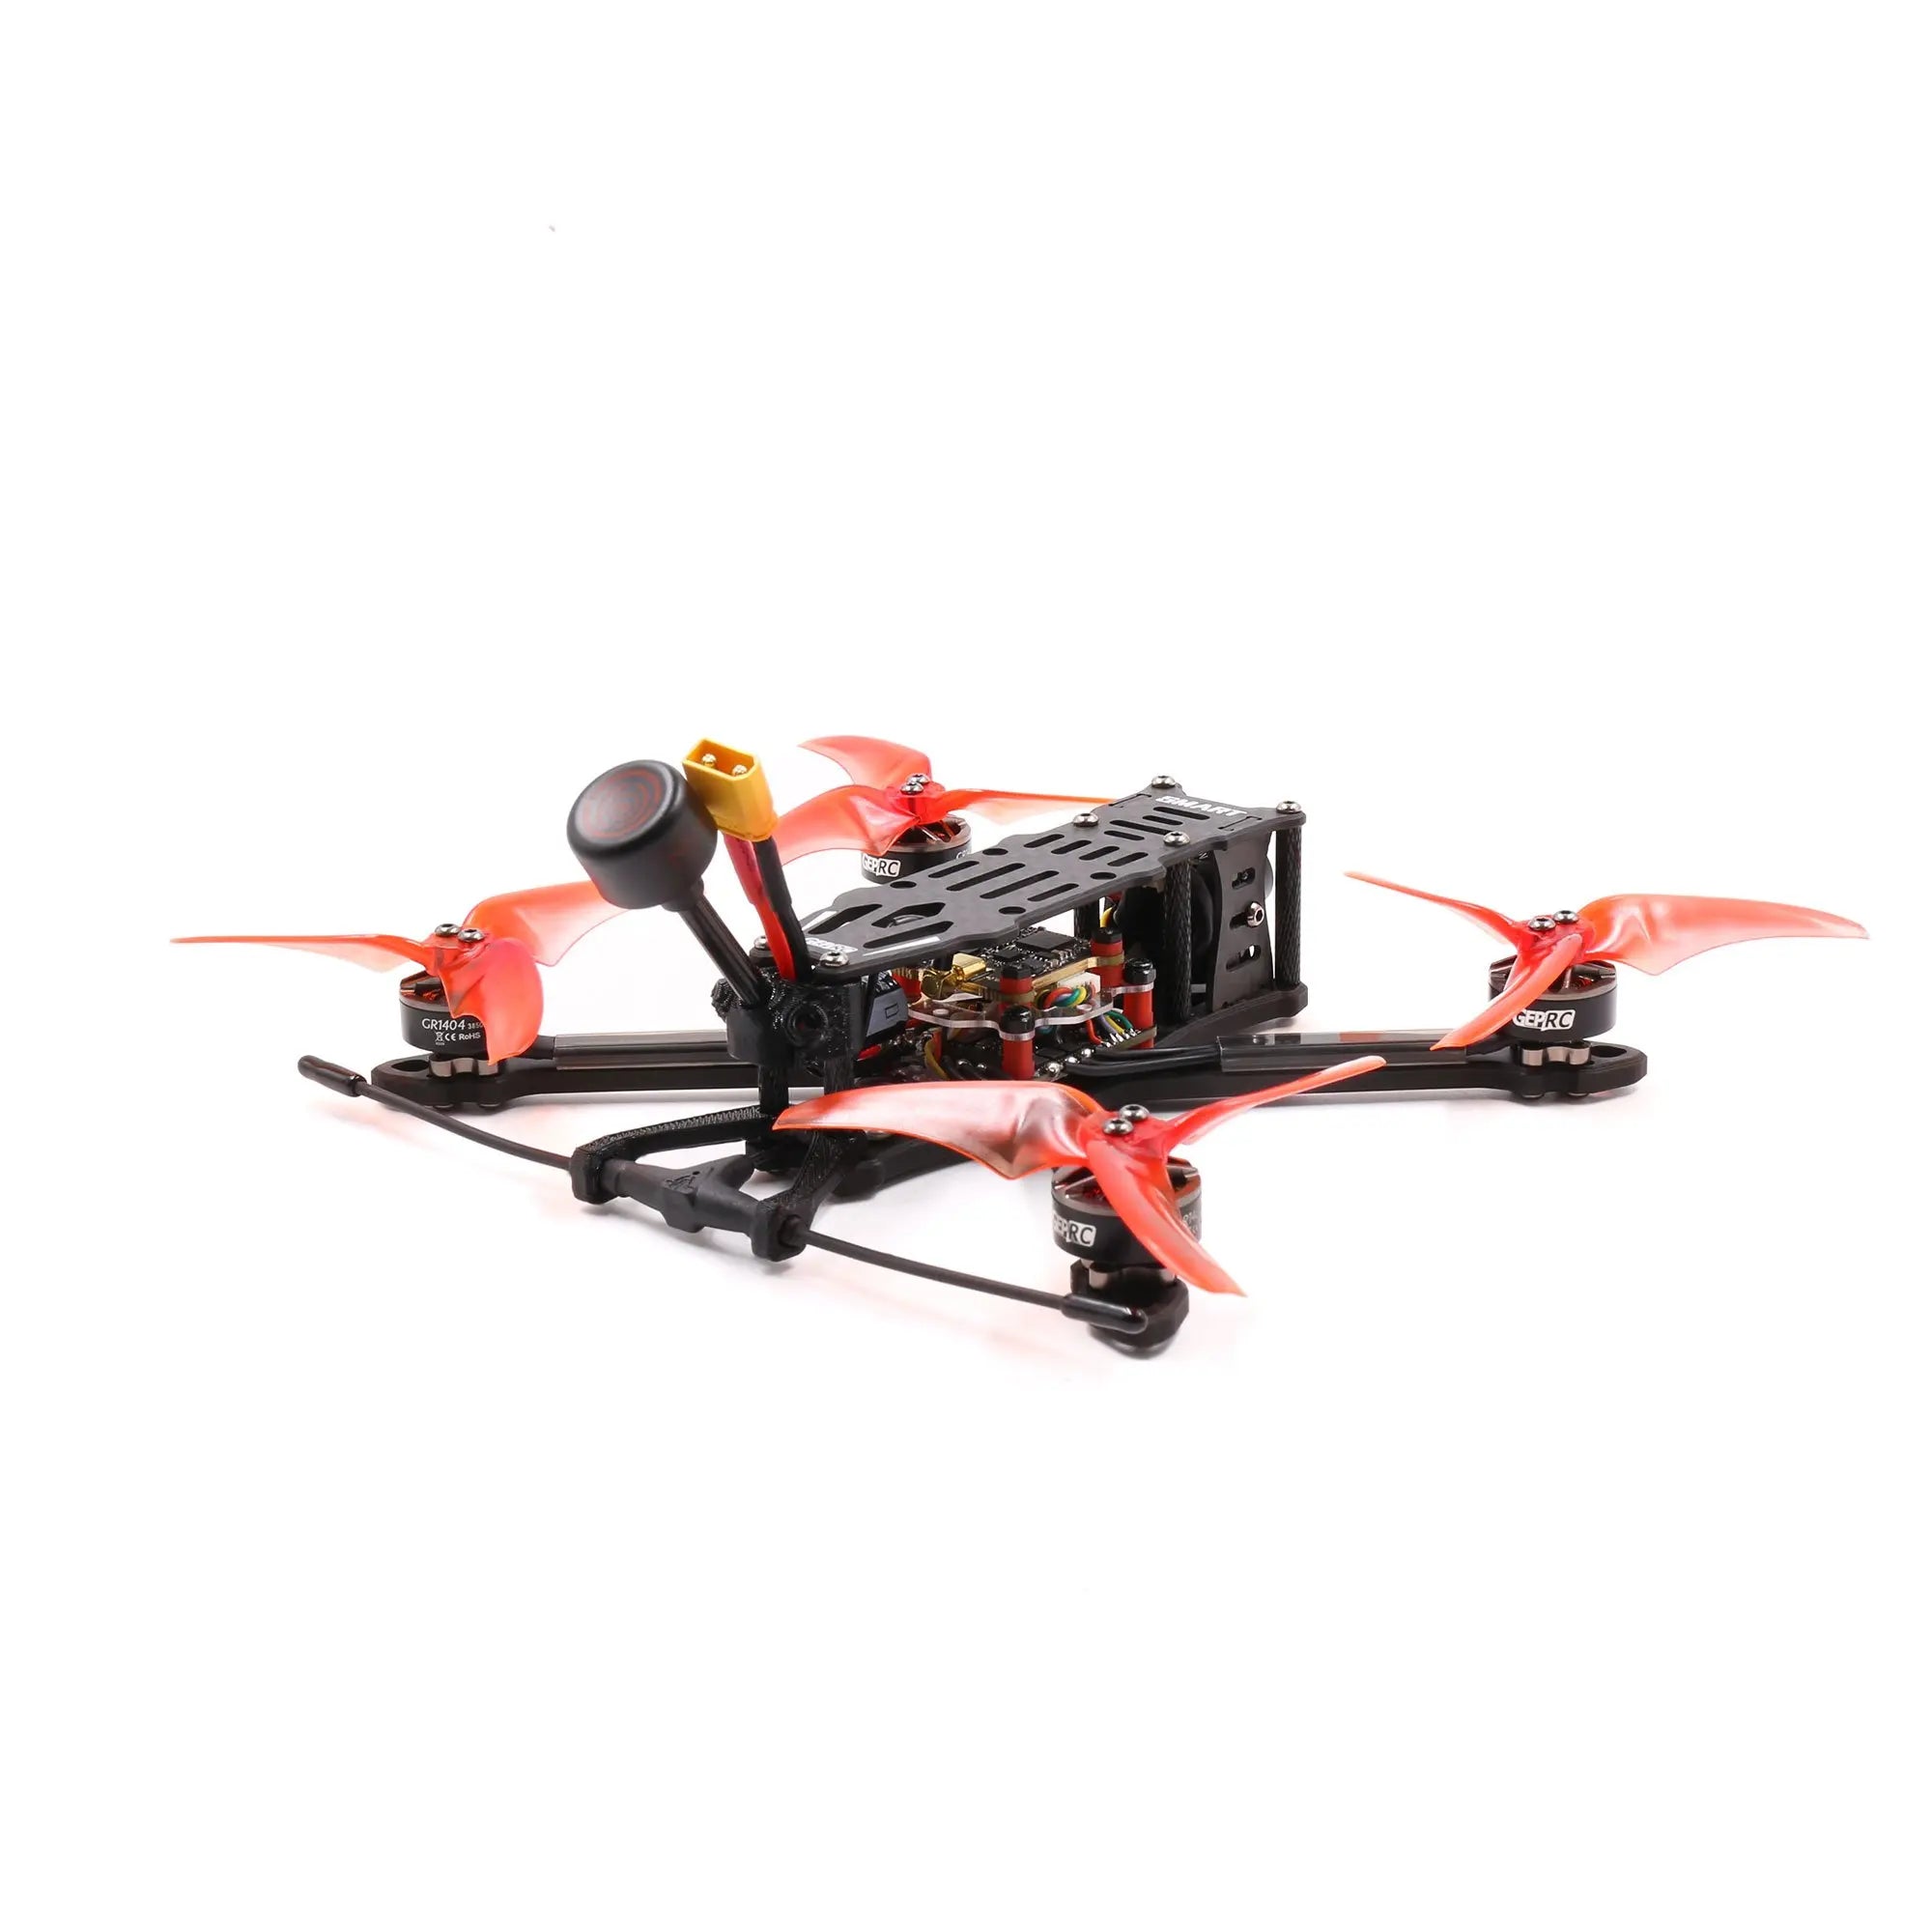 GEPRC SMART 35 FPV Drone, Use 1404-3850kv motor and incredible power.